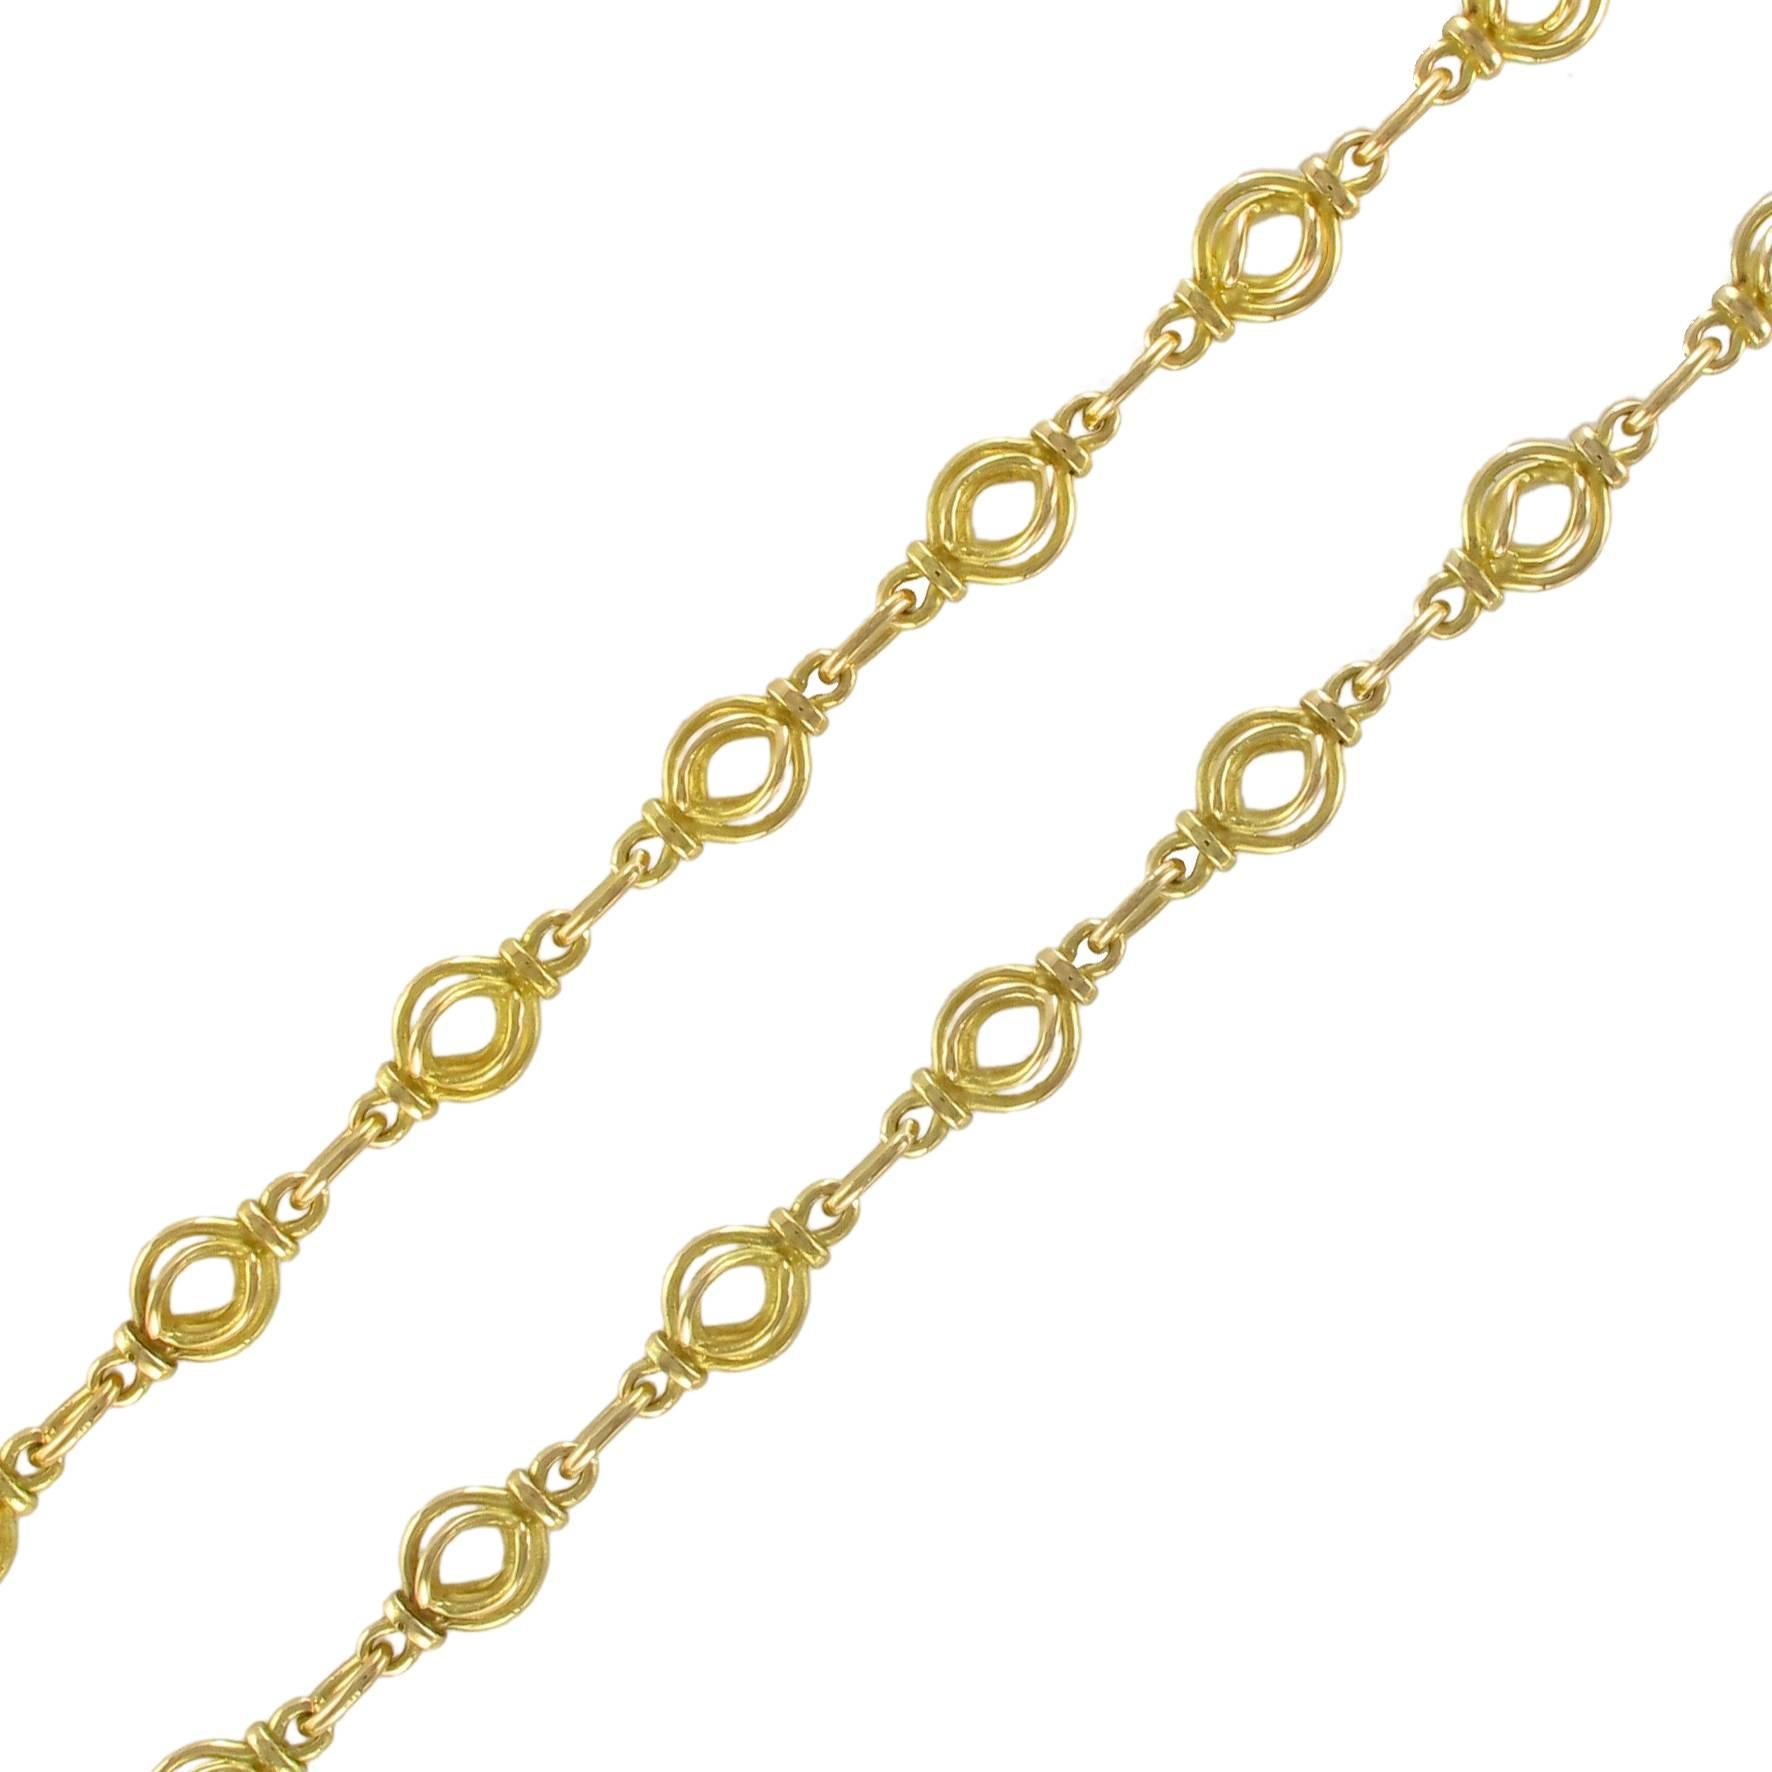 Necklace in 18 carats yellow gold.
Large antique chain necklace featuring round openwork motifs of solid gold rings separated by oval gold links. The clasp is a large spring ring clasp. 
Length: 76.5 cm, mesh width: 9.6 mm.
Total weight : 79.5 g